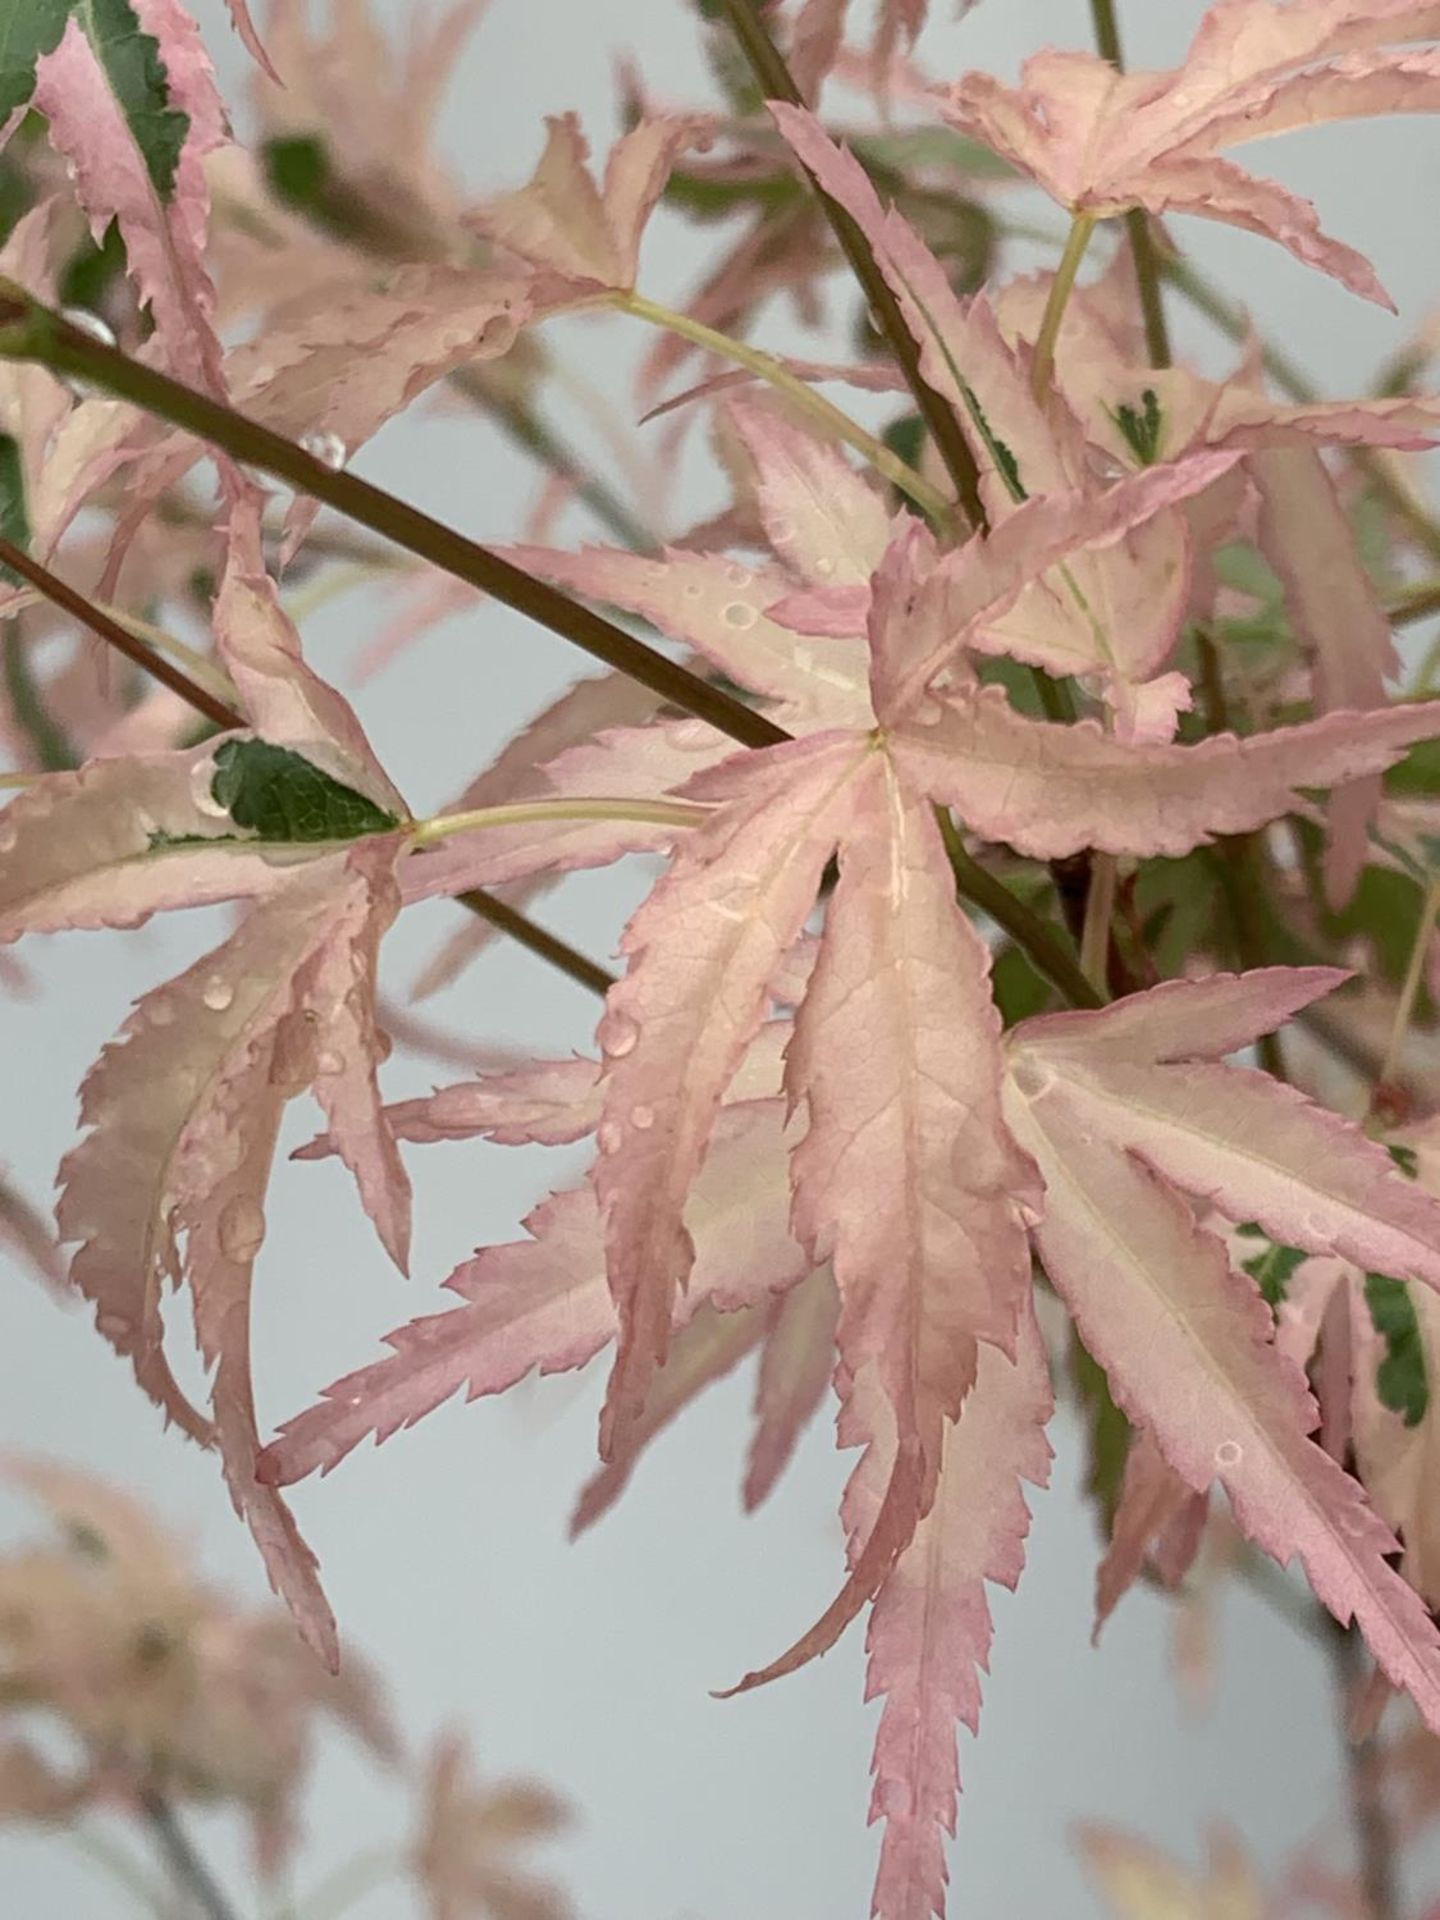 TWO ACER PALMATUM JAPANESE JEWELS TO INCLUDE TAYLOR AND SHAINIA IN 3 LTR POTS 60-70CM TALL TO BE - Image 4 of 9